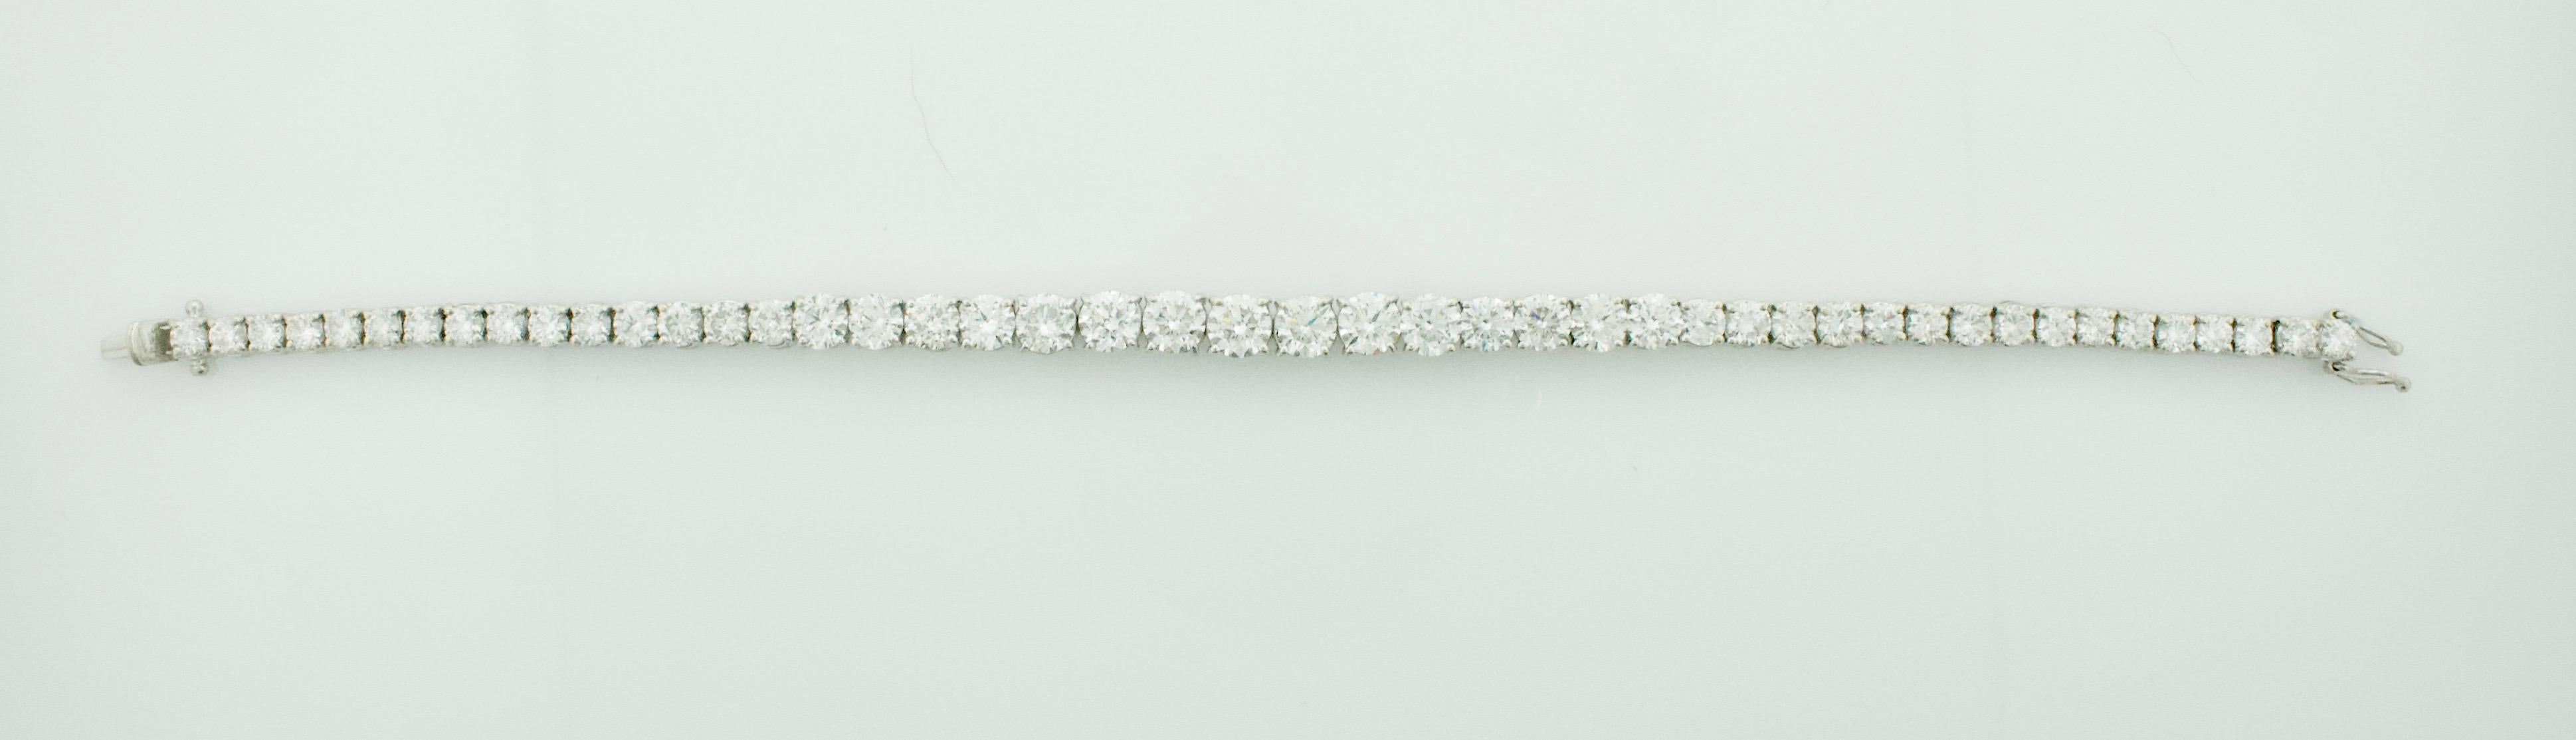 Tapered Diamond Tennis Bracelet in 18k White Gold 9.75 Carats
Purchased in Dubai in Early 2000's 
47 Round Brilliant Cut Diamonds Weighing 9.75 Carats Approximately [Color GH Clarity VVS - SI]
7 Round Brilliant Cut Diamonds Weighing 3.10 Carats